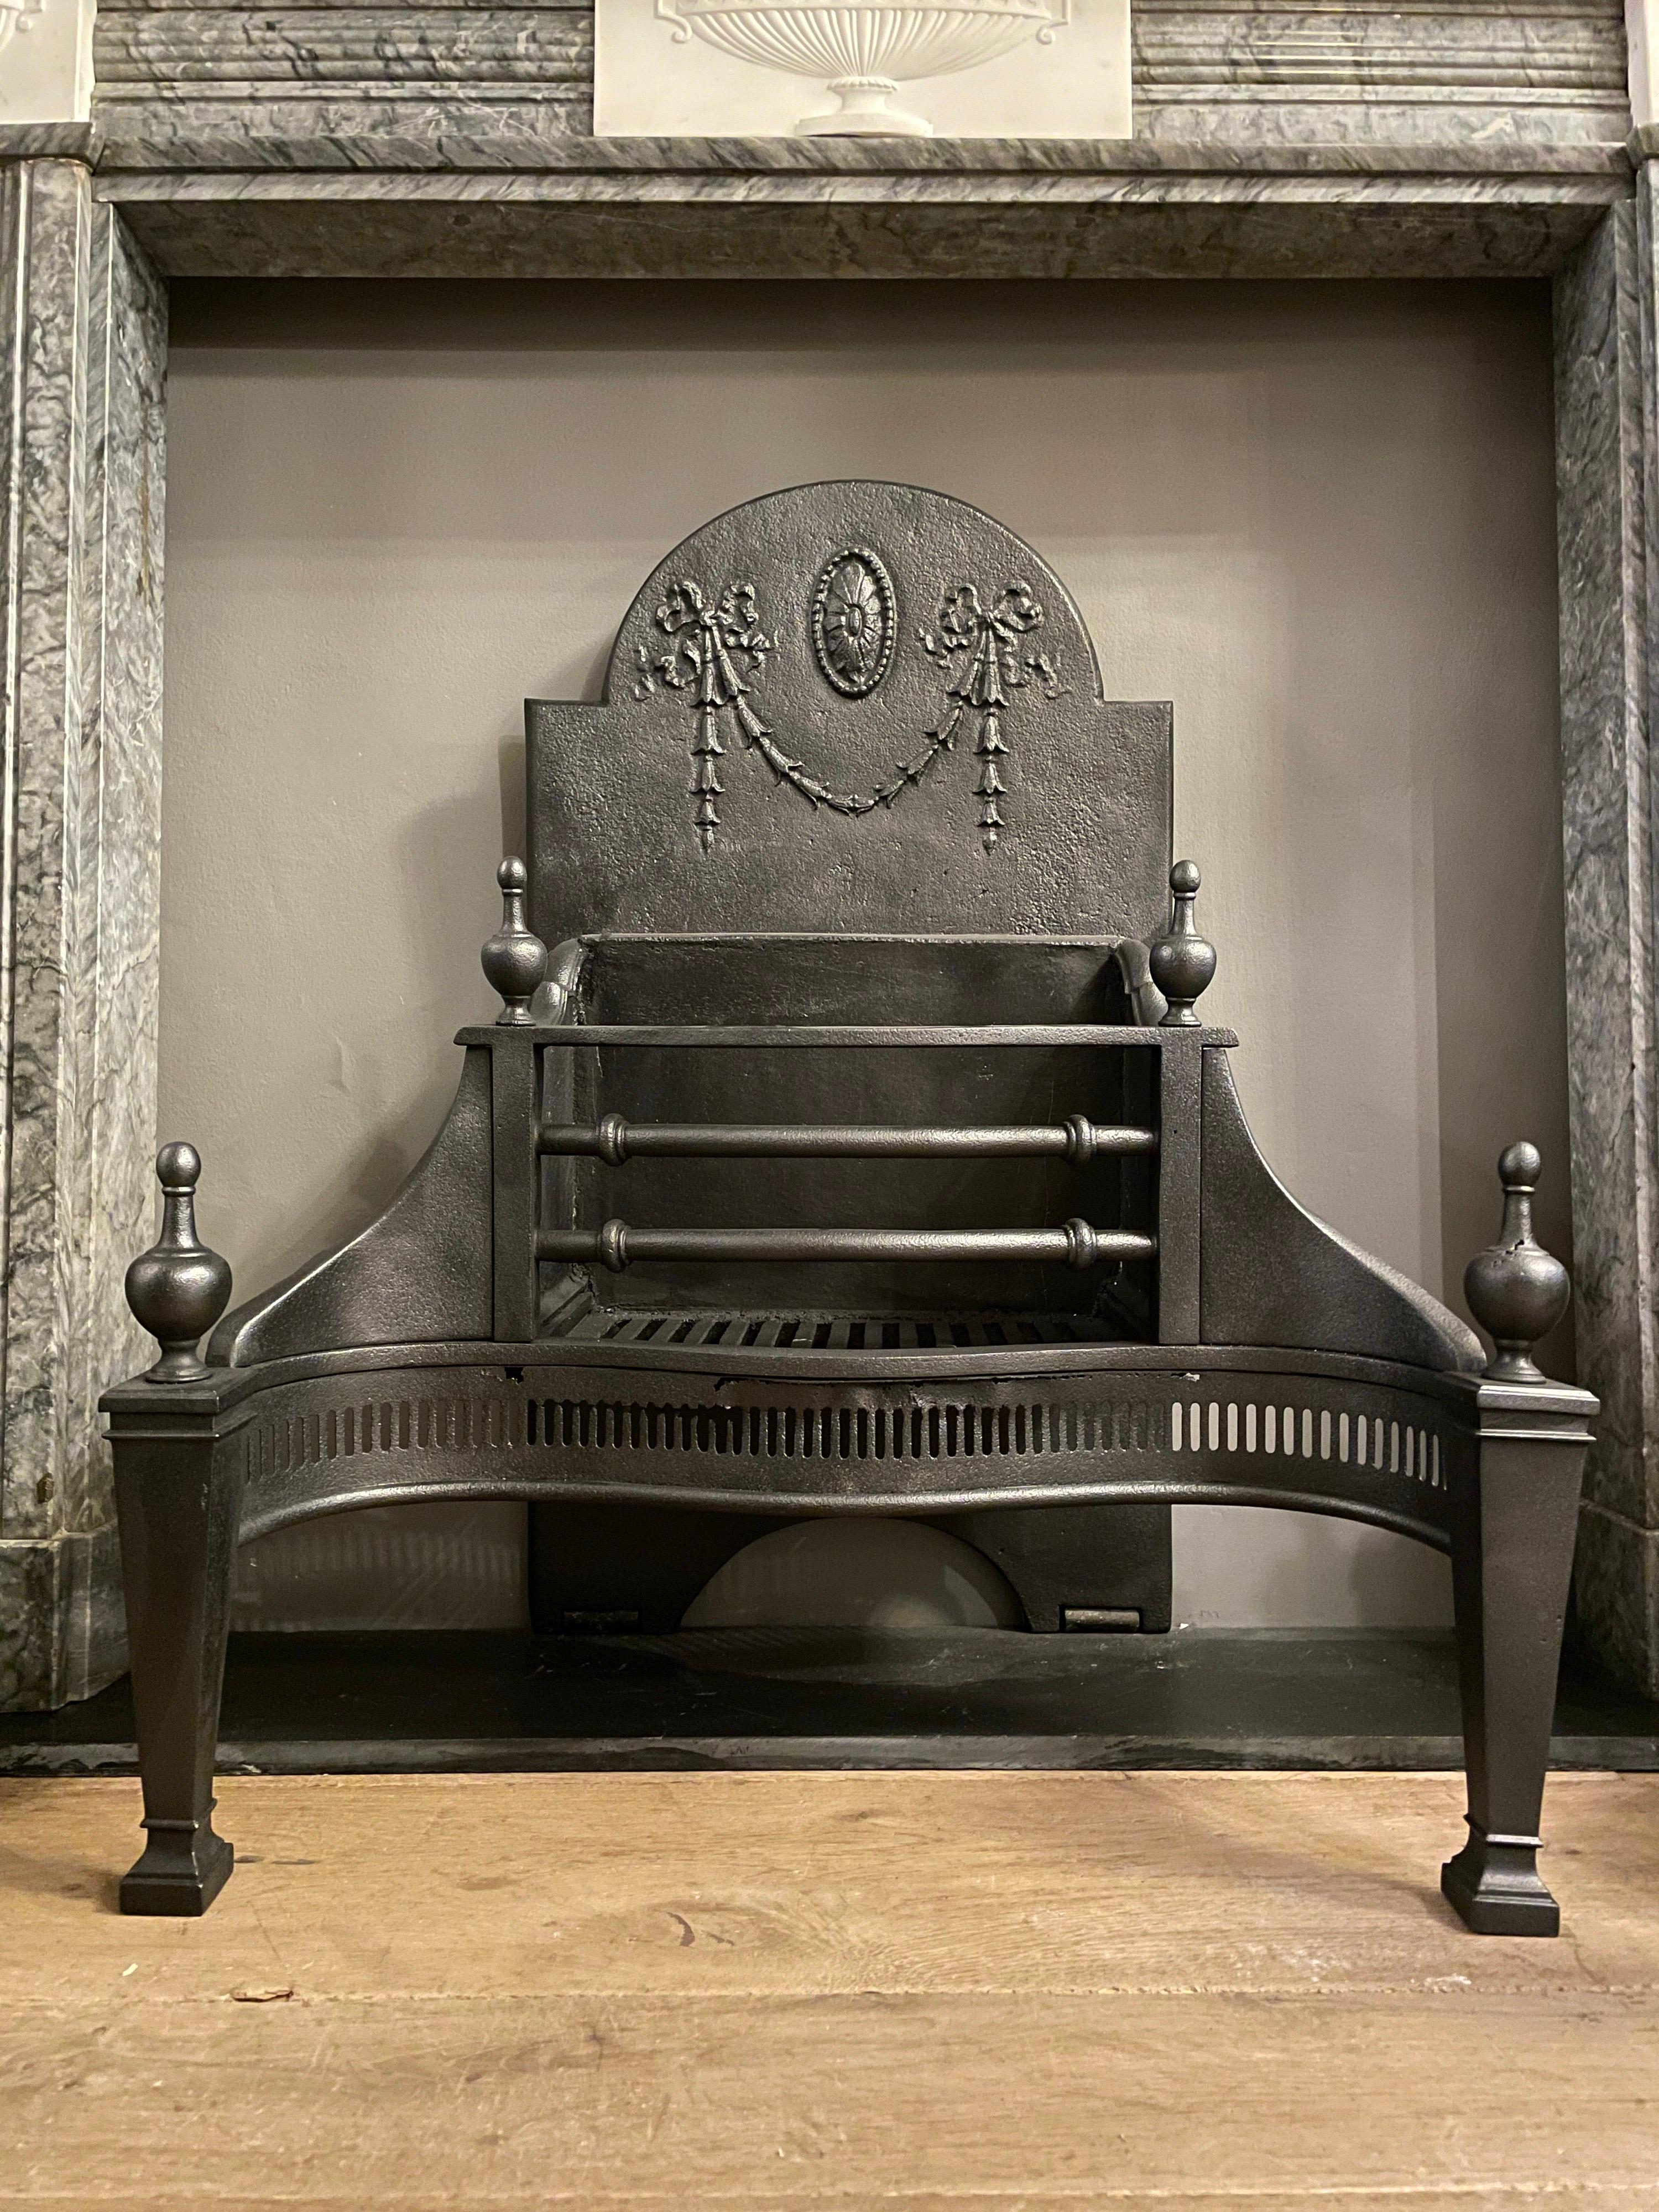 A lead polished steel fire grate in the Georgian manner, with tapering columned legs caped with finials. Plain wings with decorative burning bars and a fireback with oval patarae and bell drop drapery and wheels for movement at base. The fluted fret